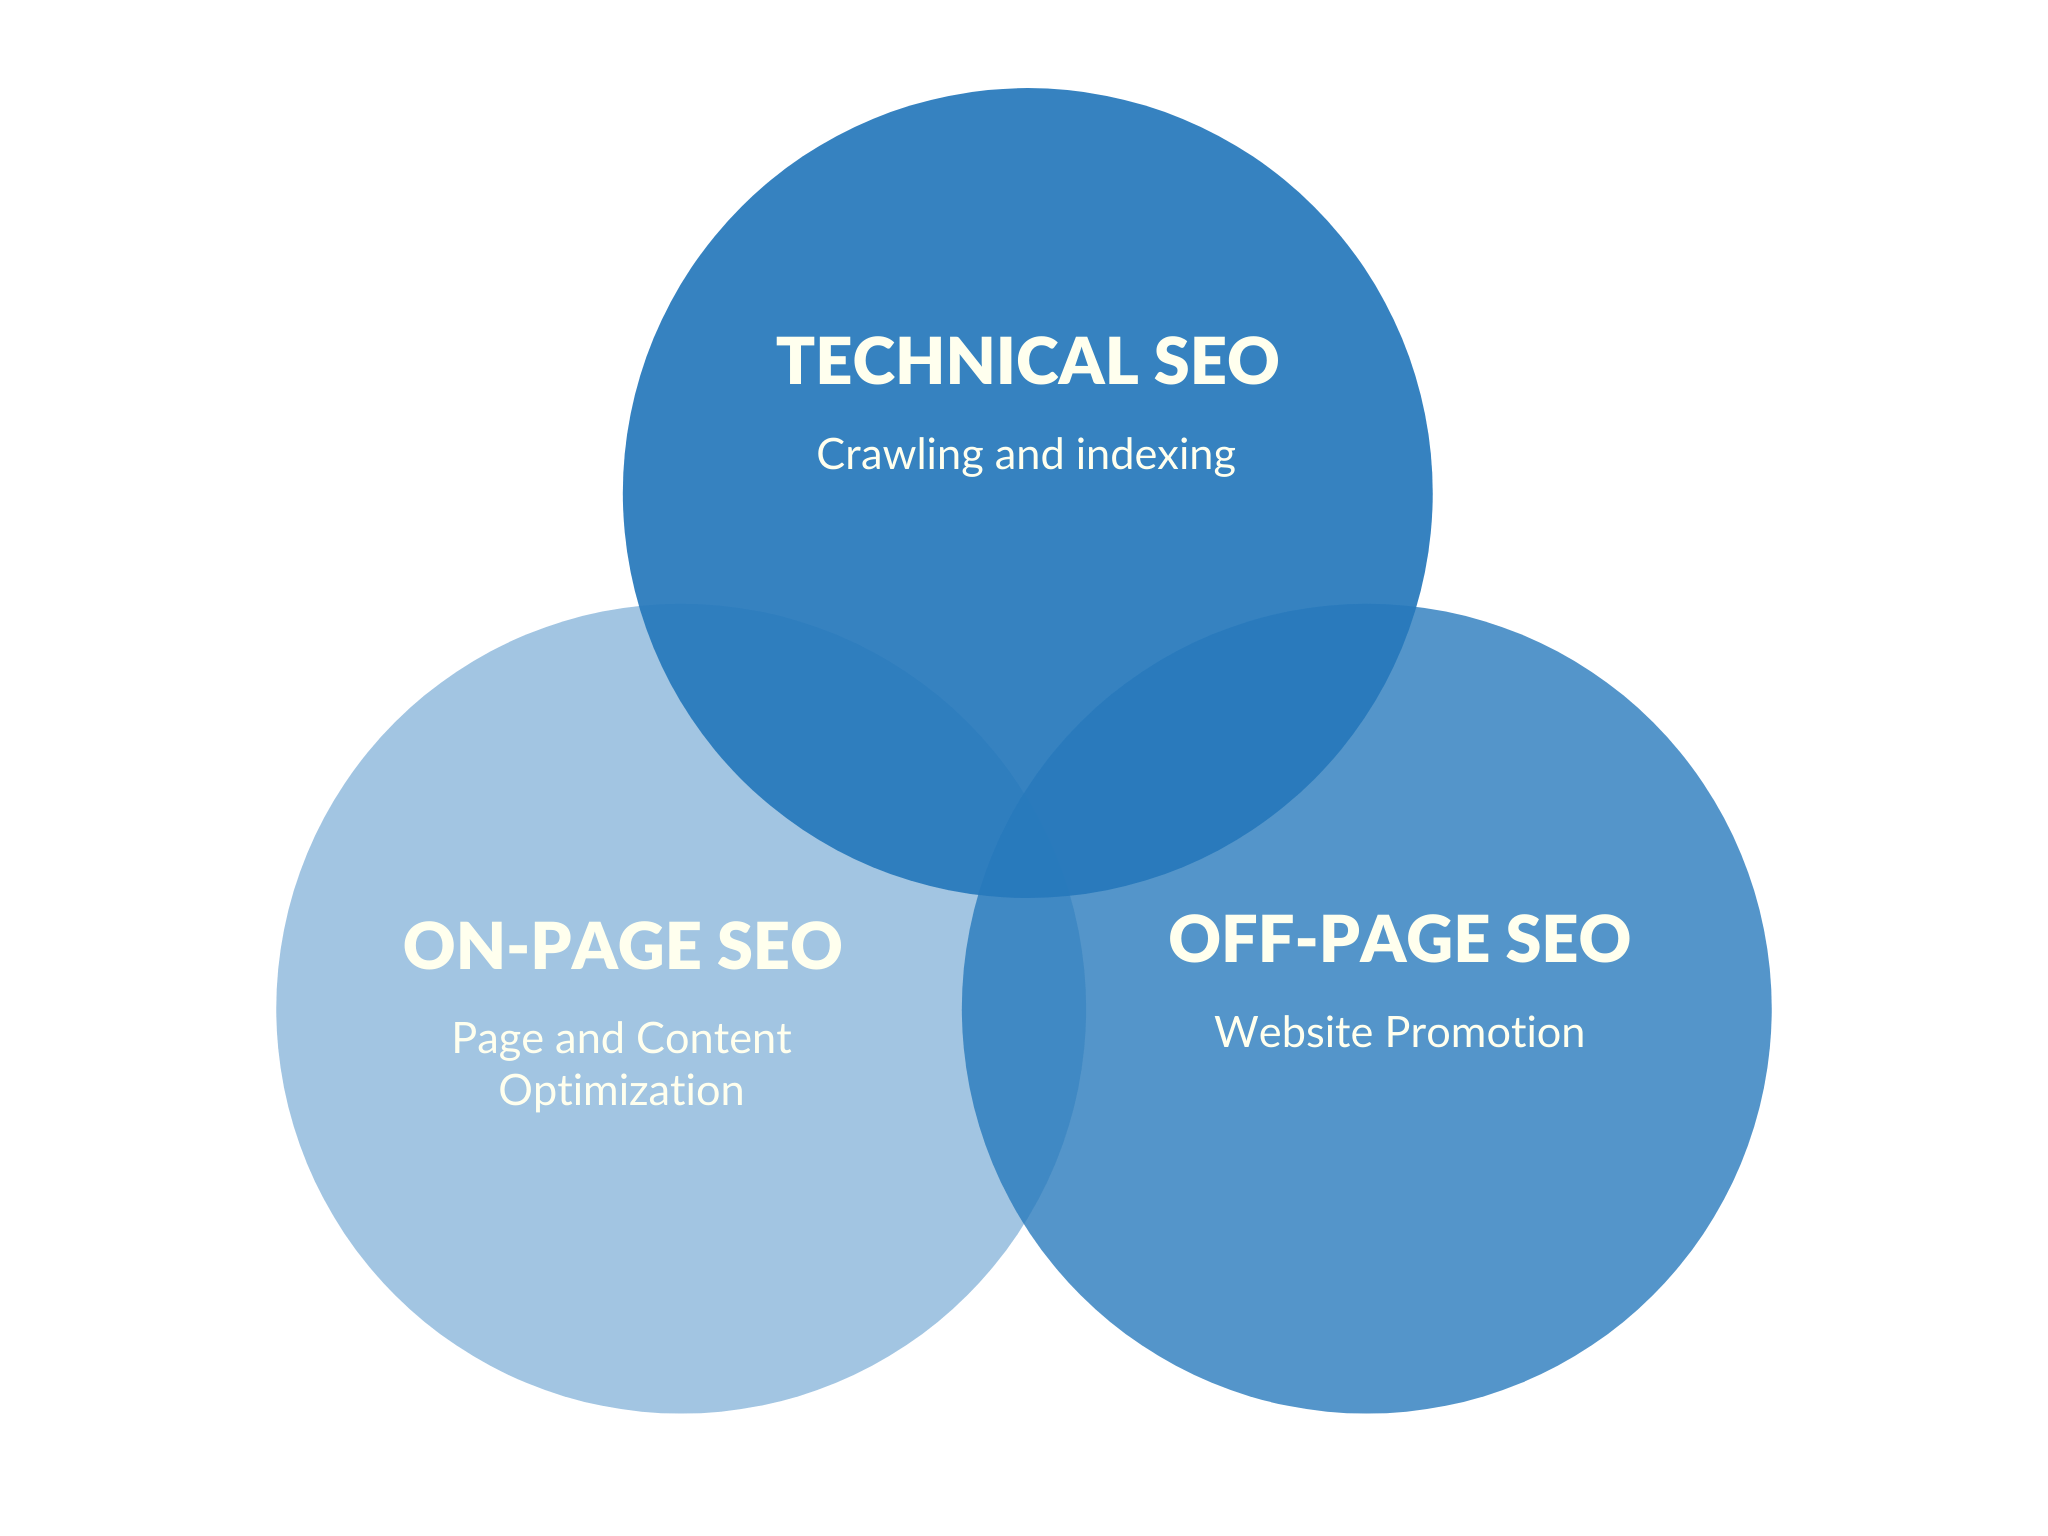 The main advantages of writing SEO content for new businesses